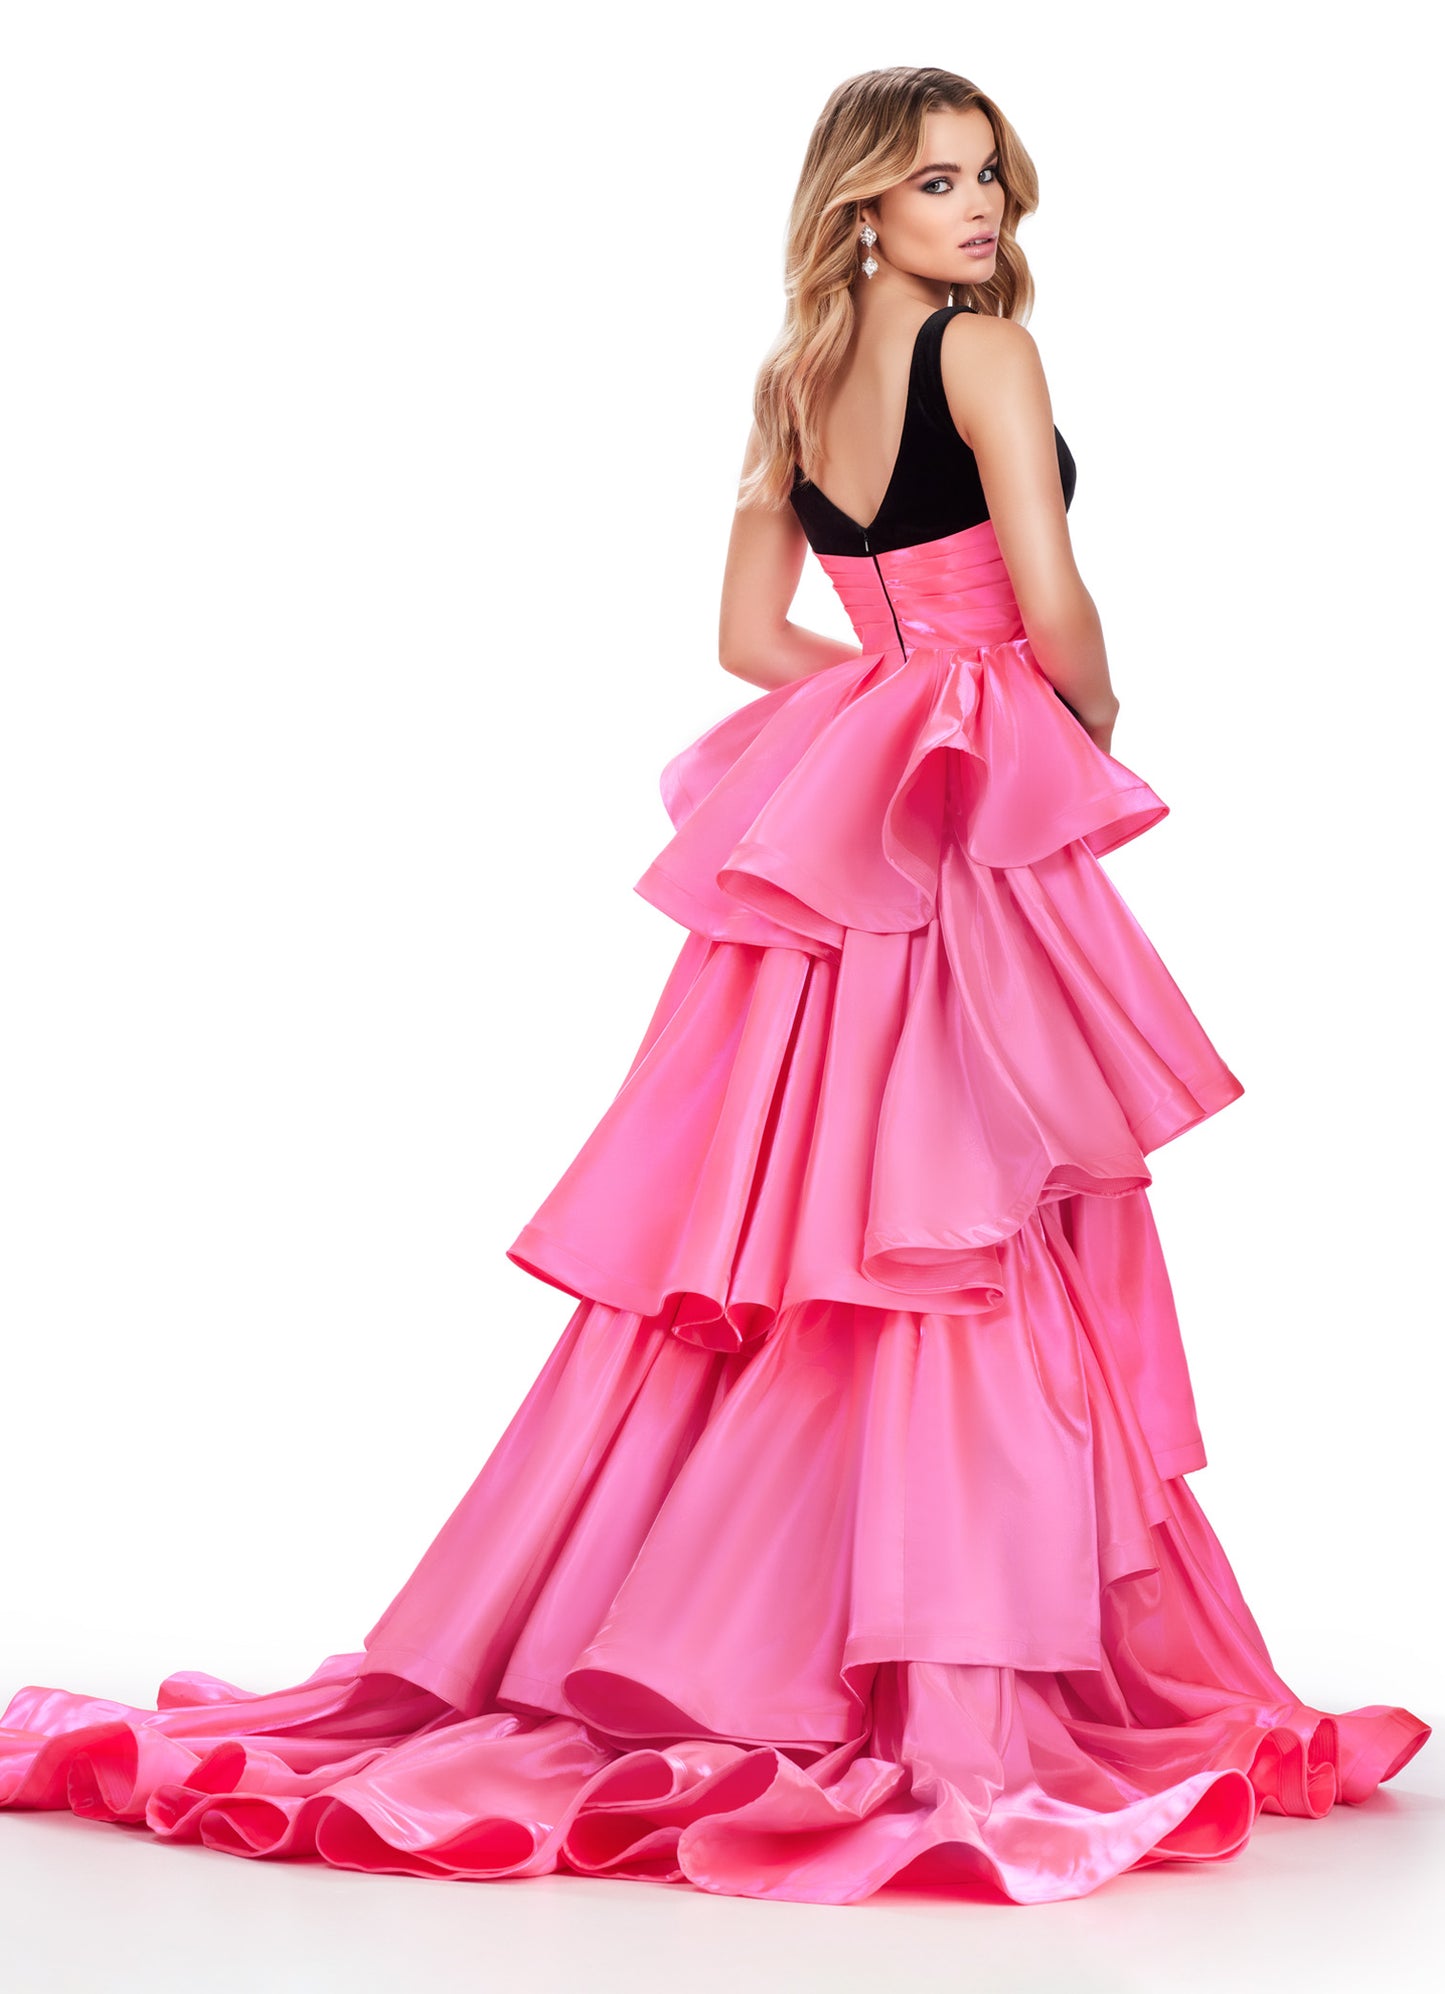 Be the belle of the ball in the Ashley Lauren 11643 Long Prom Dress. Made with luxurious velvet and satin, this fitted gown features a sophisticated V neck and a stunning ruffled overskirt. Perfect for any formal event or pageant, this gown exudes elegance and grace. This stunning velvet gown is perfect for your next event. This unique v neckline gown features a gorgeous ruffled heavy satin overskirt.